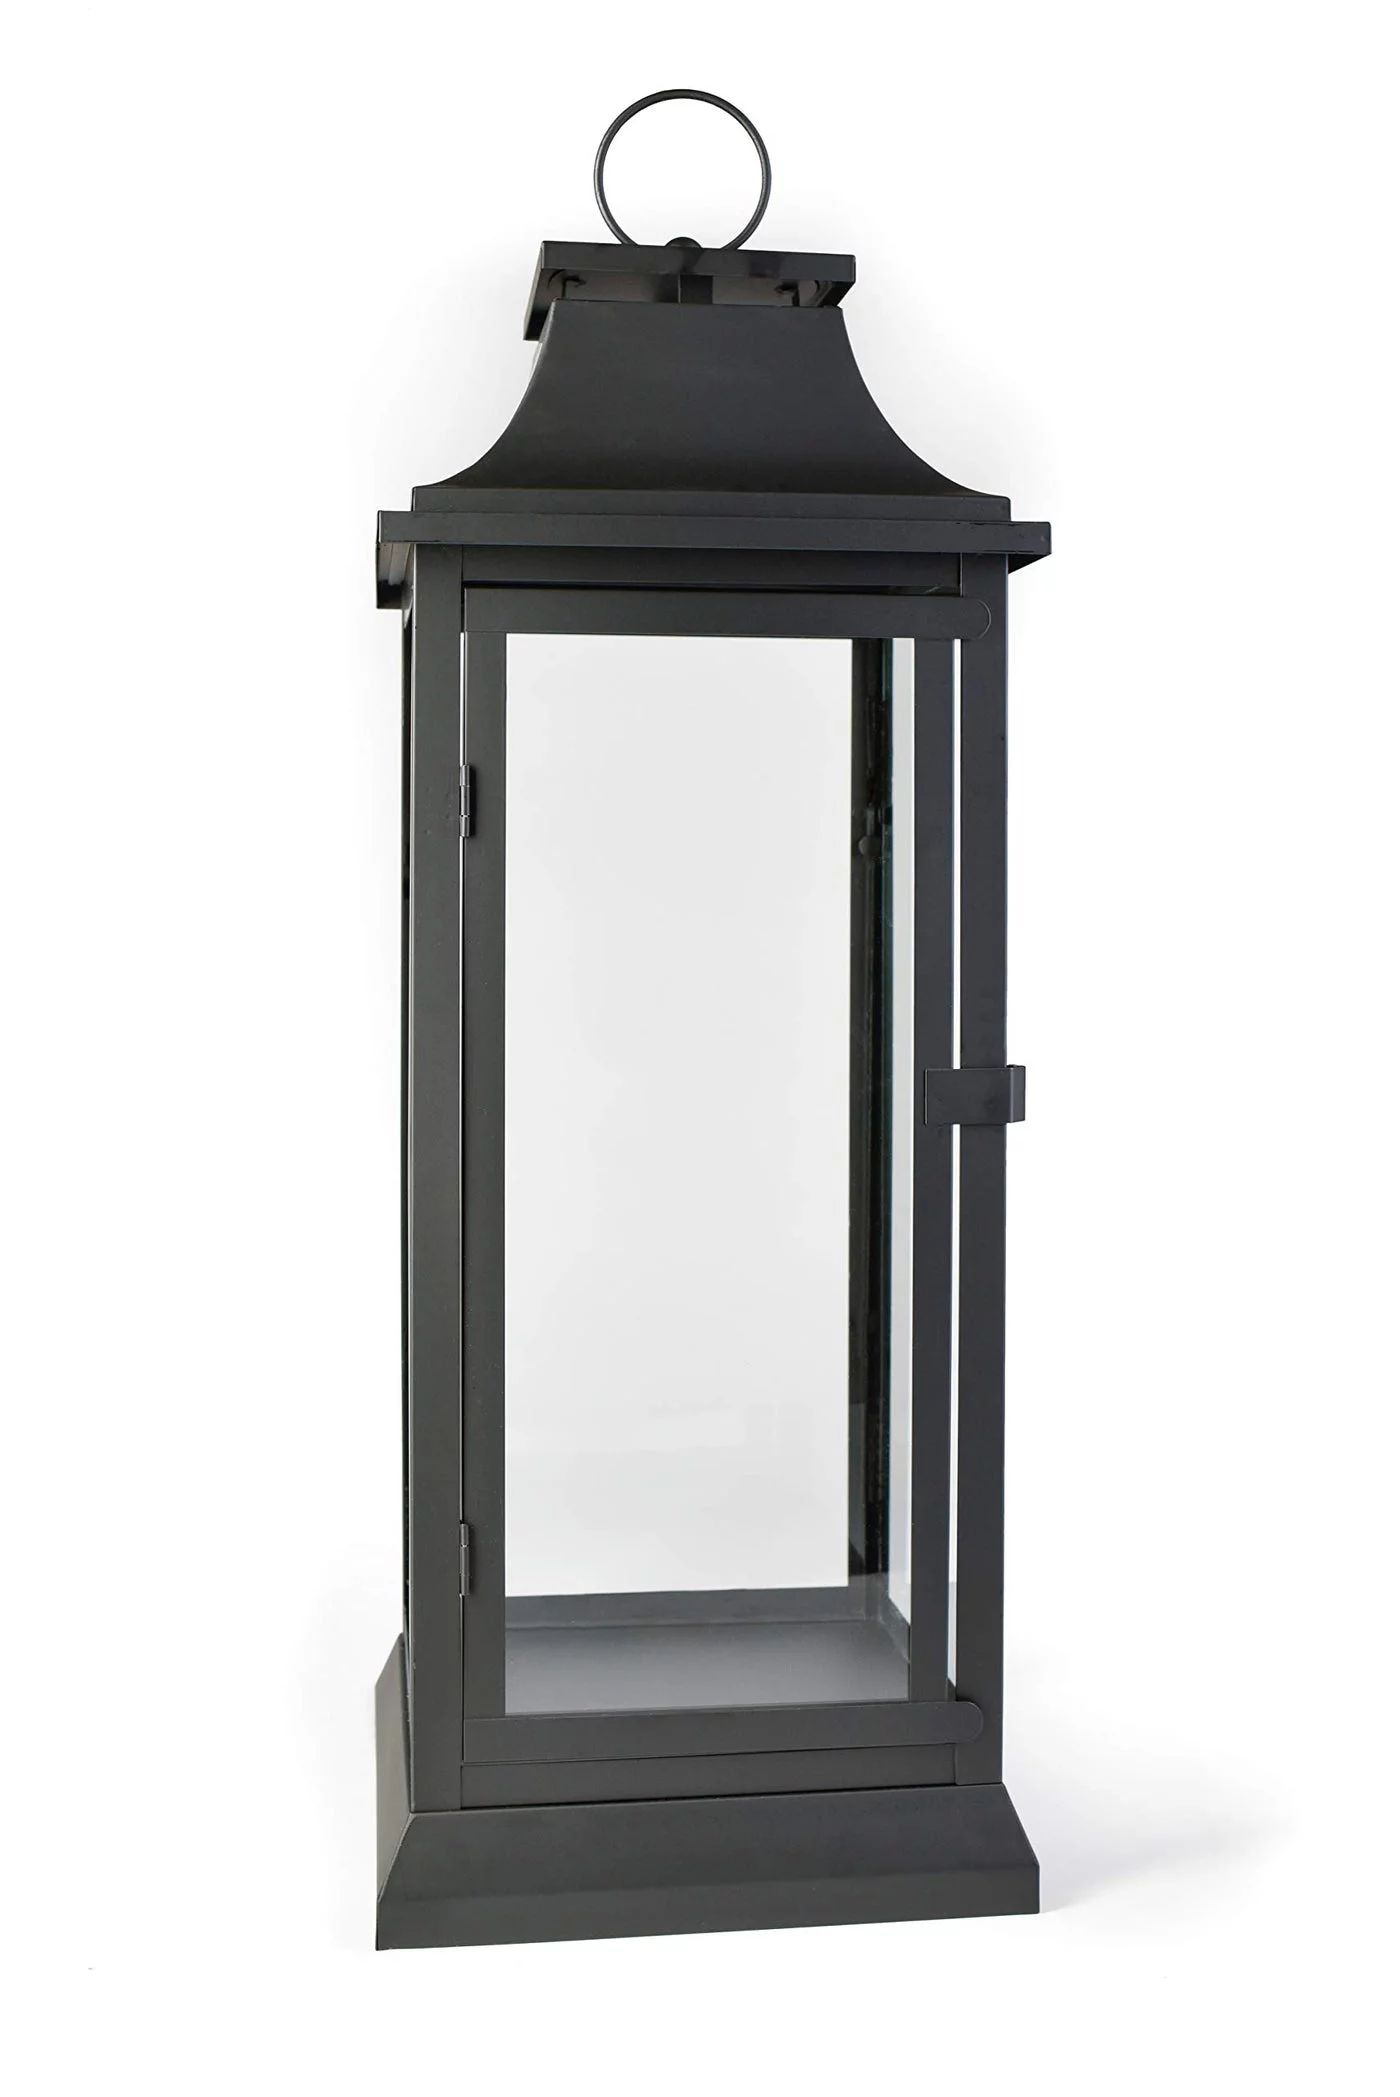 Serene Spaces Living Black Hurricane Lanterns with Clear Glass Panels, 15" Tall and 5" Diameter | Walmart (US)